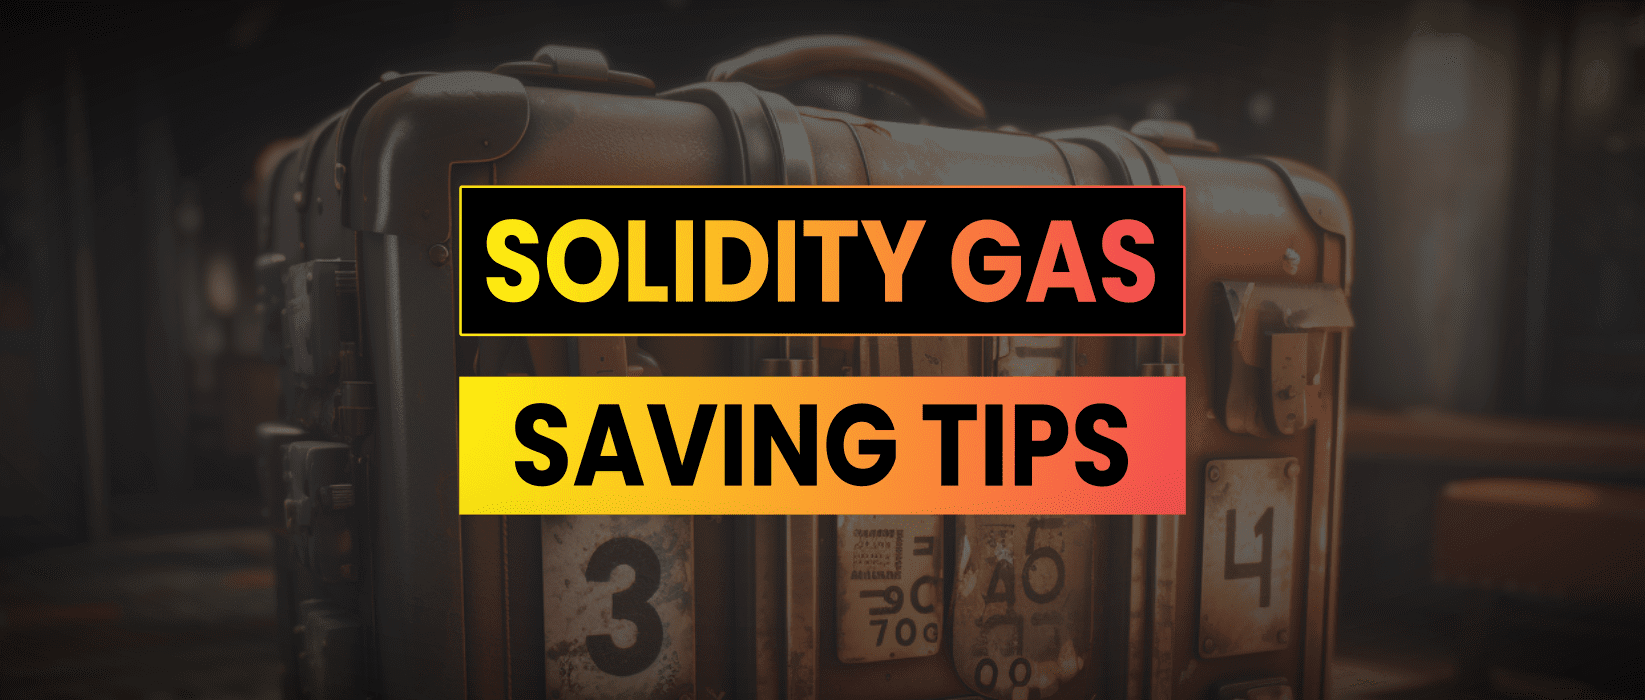 3 Tips For Gas Efficient Solidity Smart Contracts